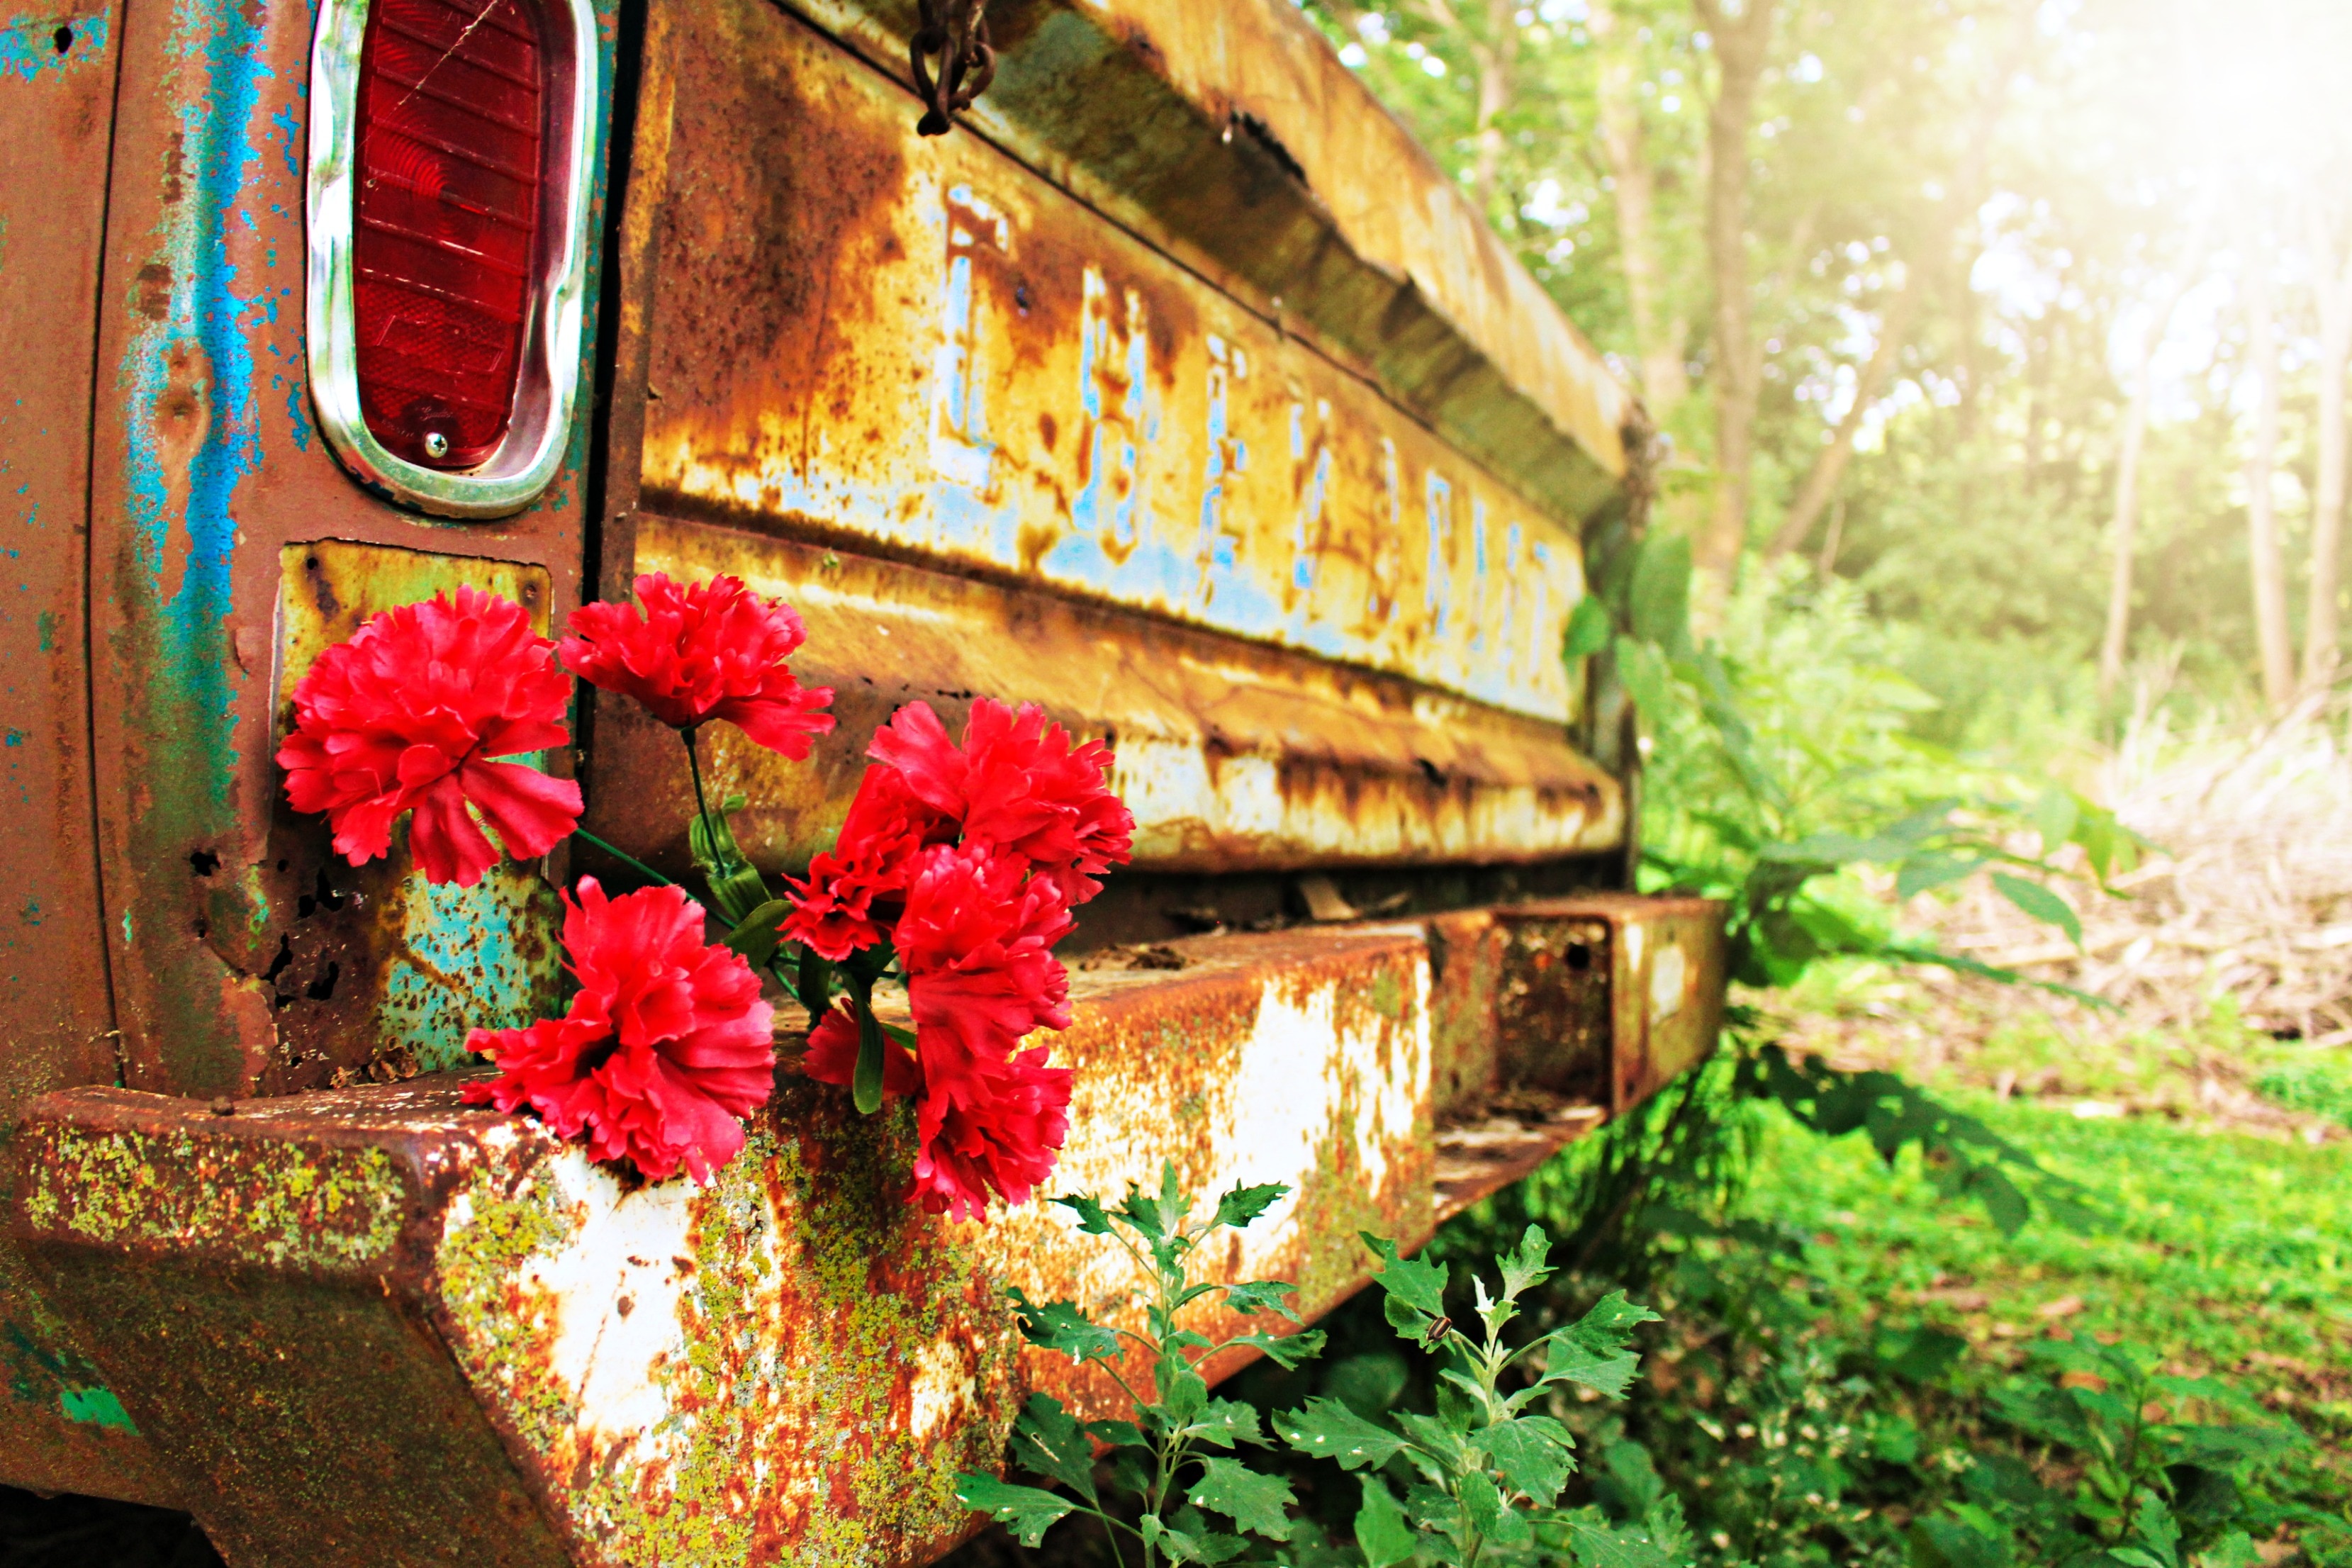 rusted metal vehicle with a flower near the tail gate